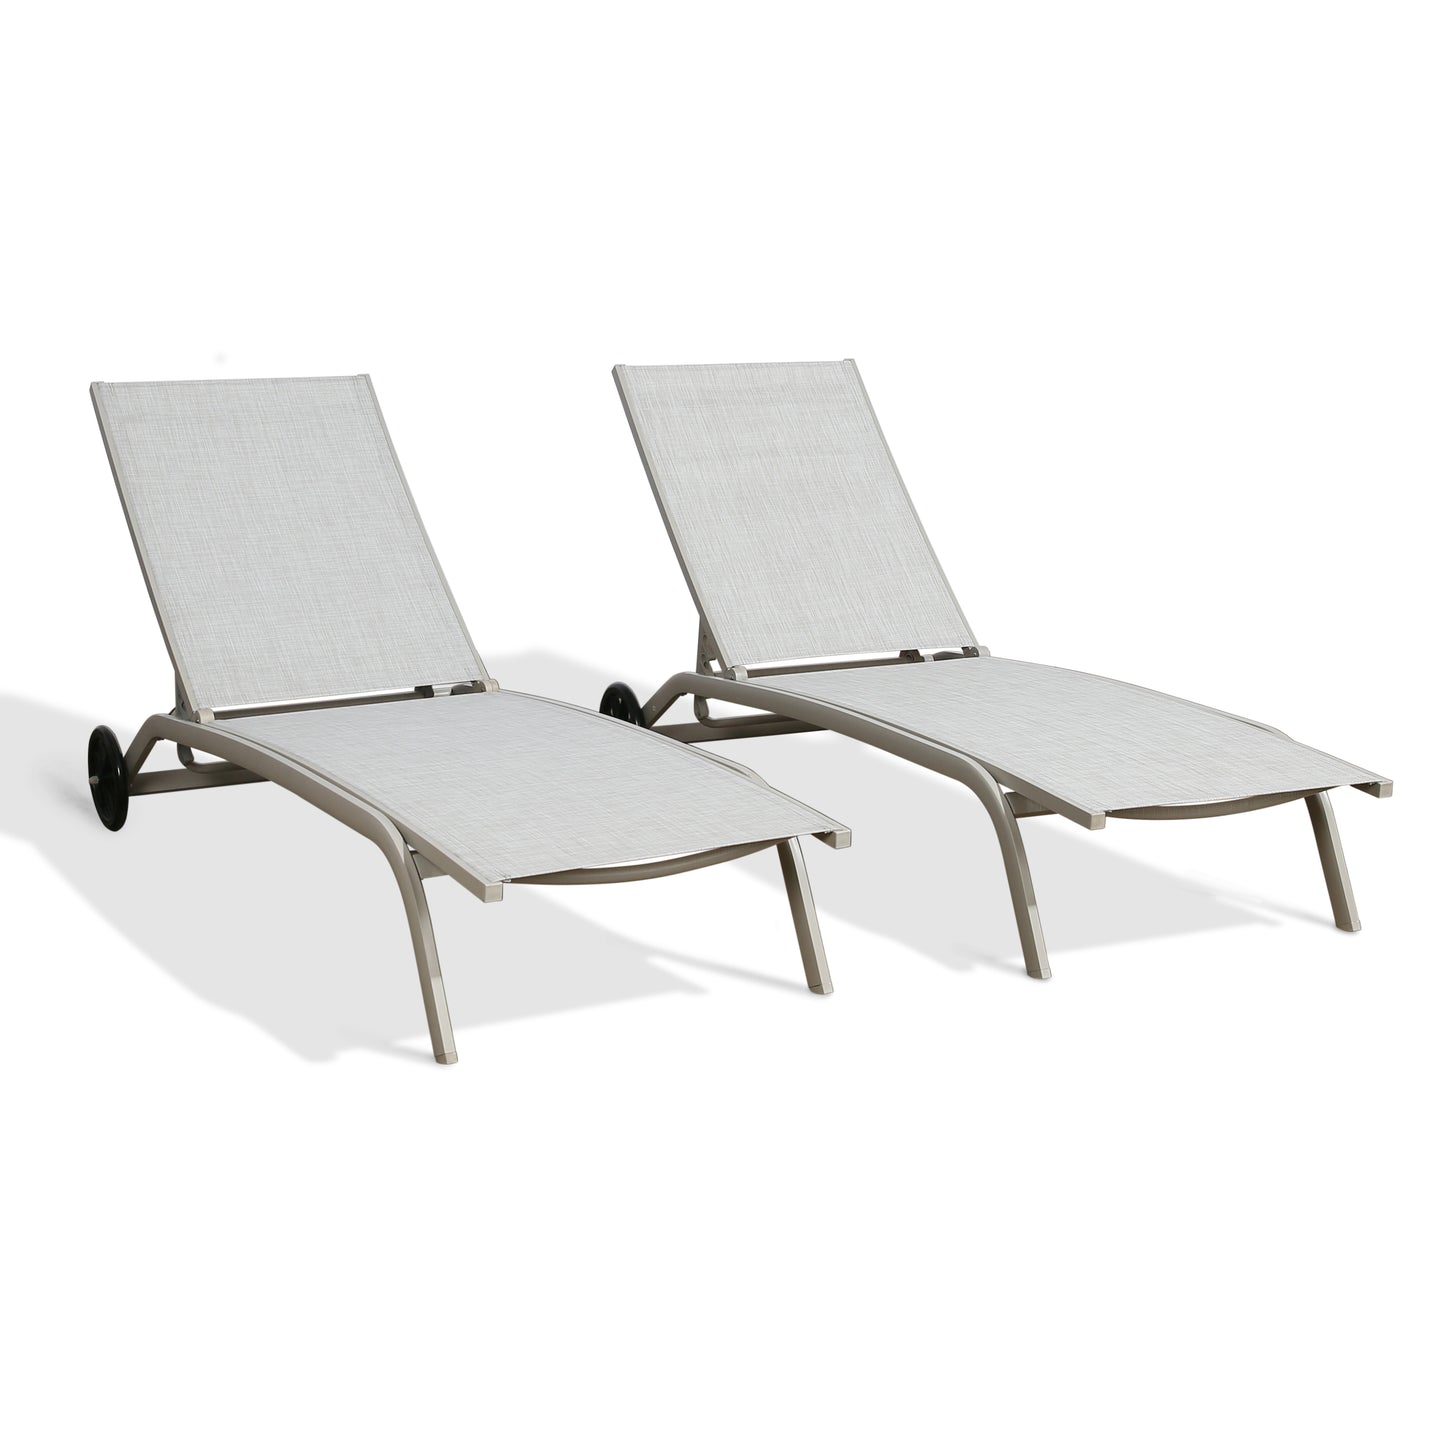 2 Pieces Patio Aluminum Chaise Lounger Outdoor Adjustable Lounge Chair with Wheels (Light Grey)